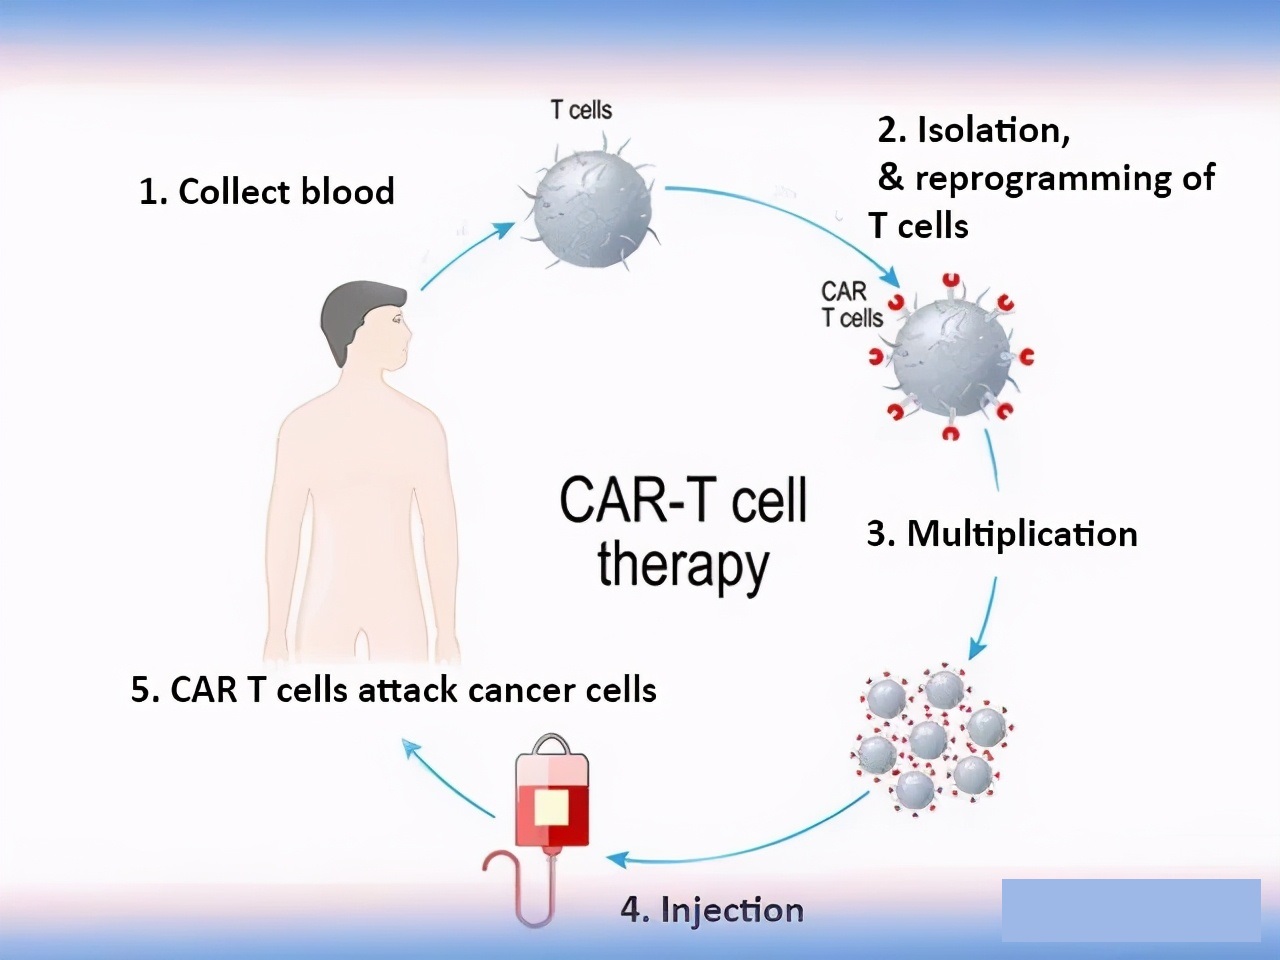 Car-t in the treatment of multiple myeloma